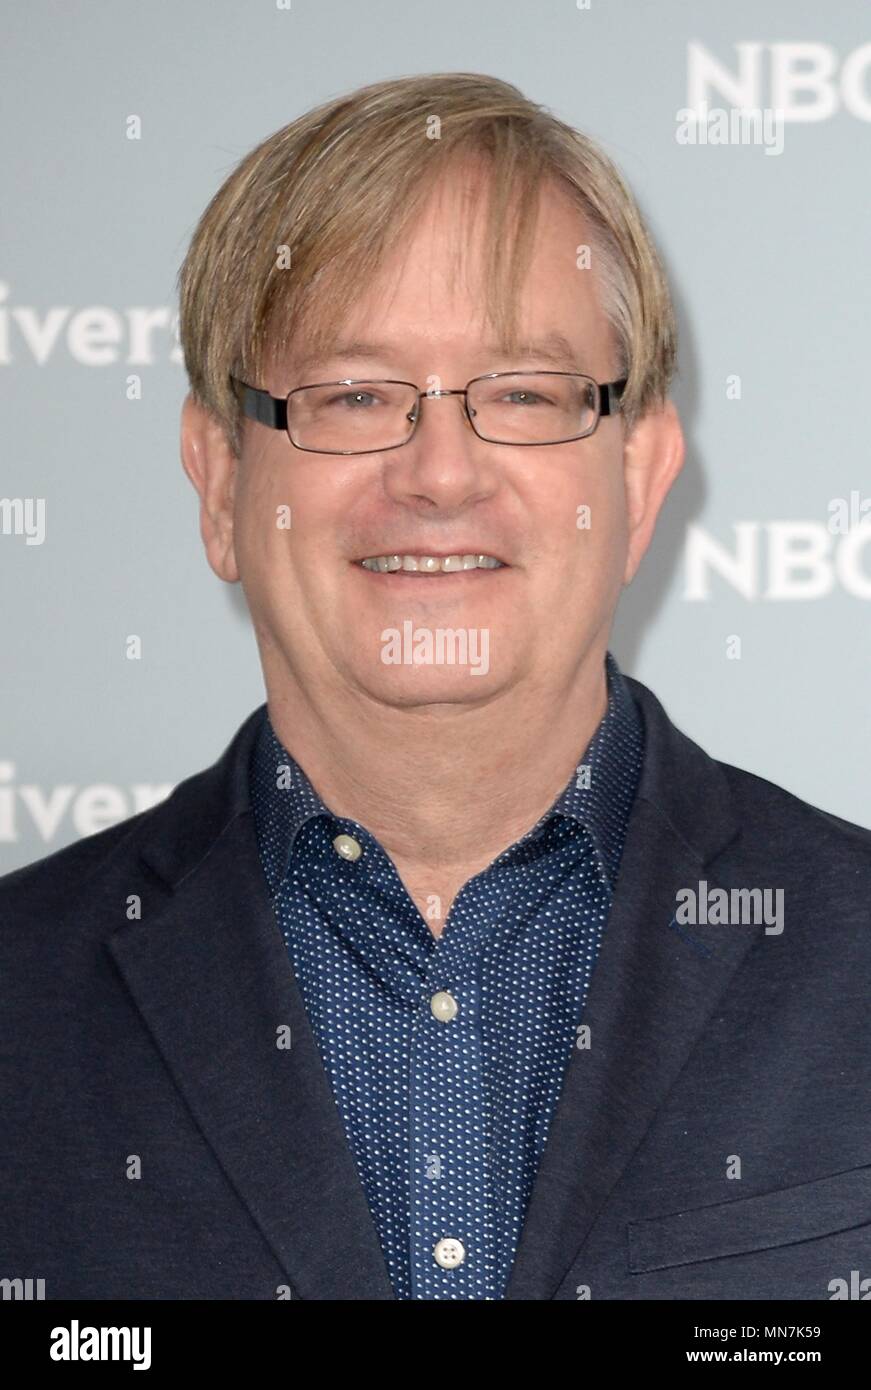 Superstore actor Mark McKinney: We're starting to see Indian